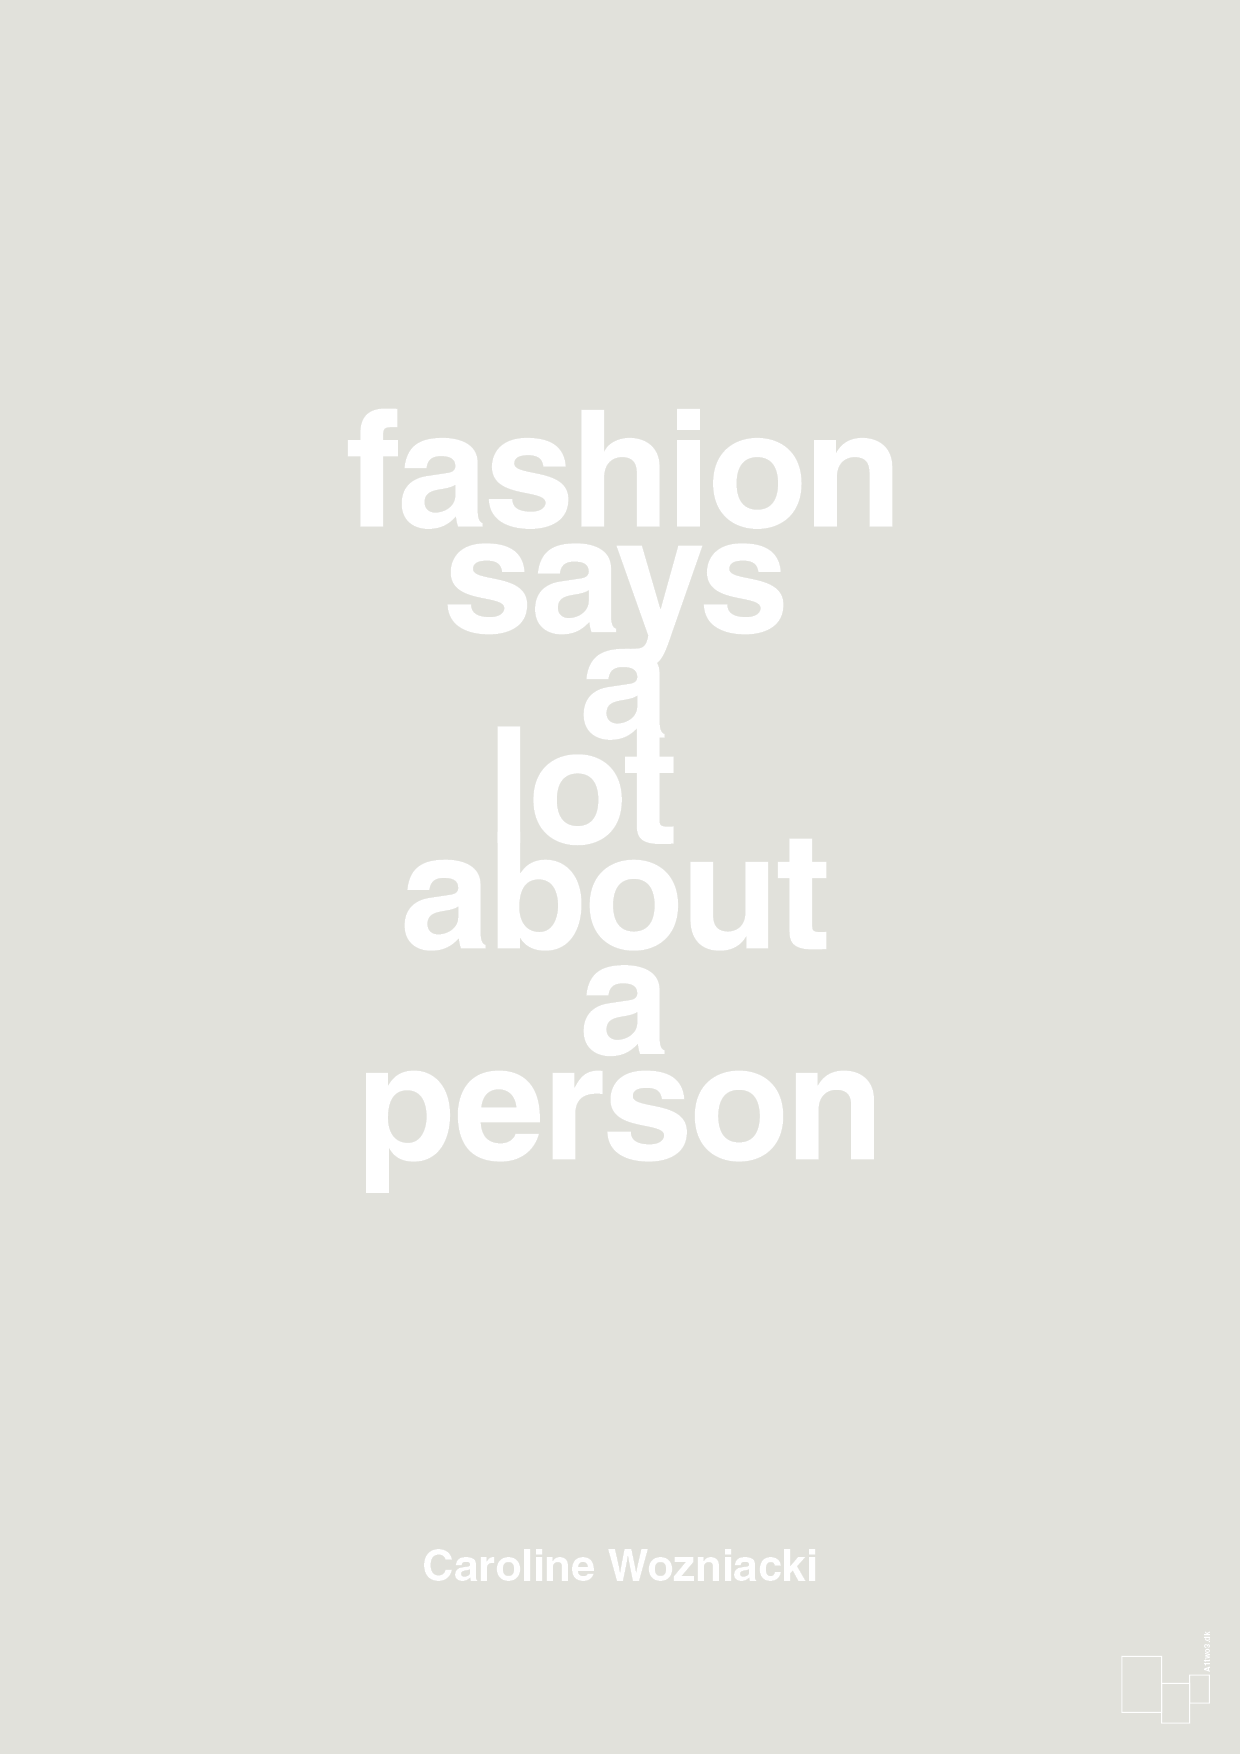 fashion says a lot about a person - Plakat med Citater i Painters White